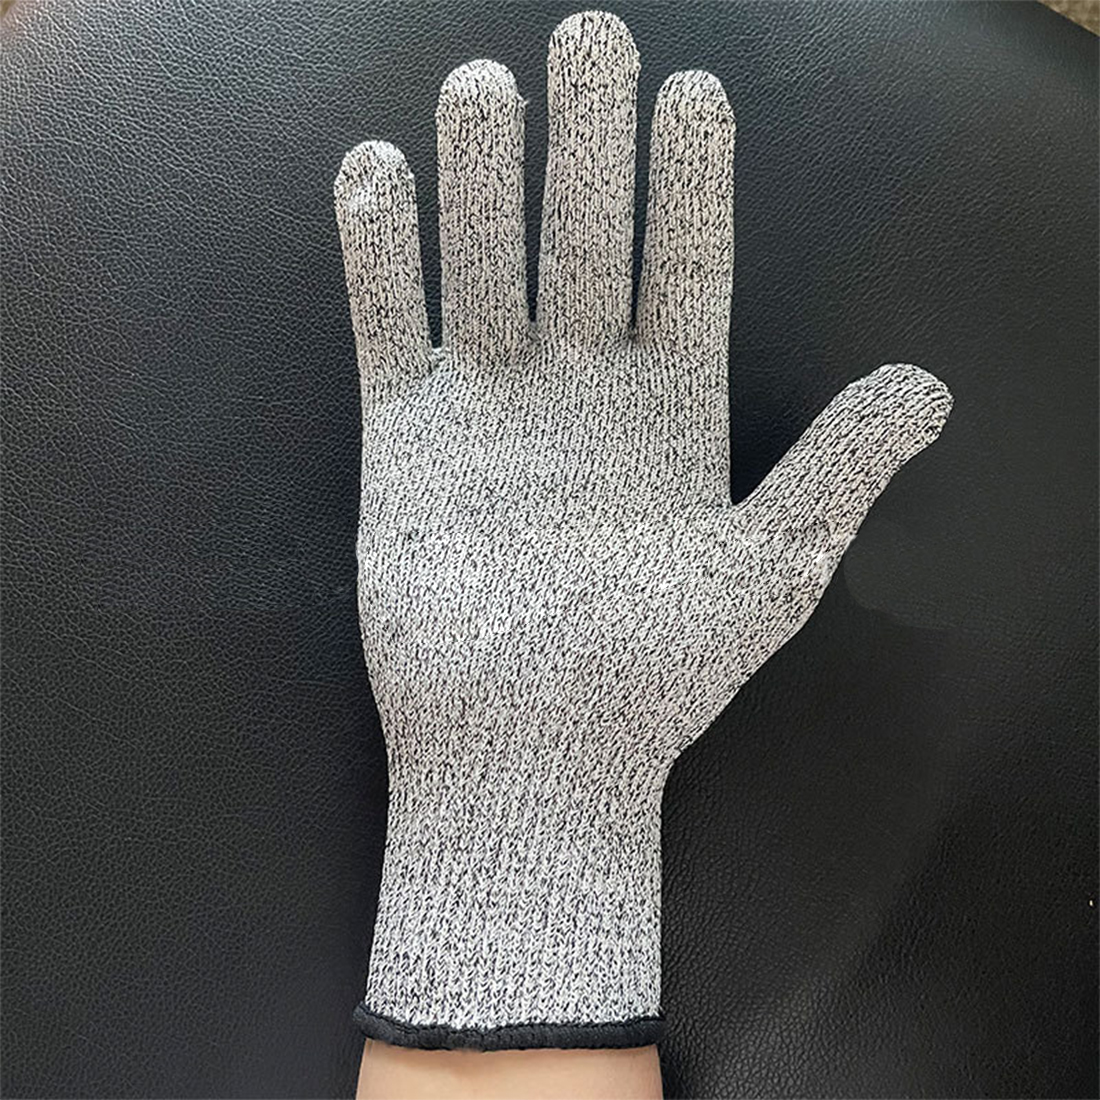 Safety Gloves Cut Resistant